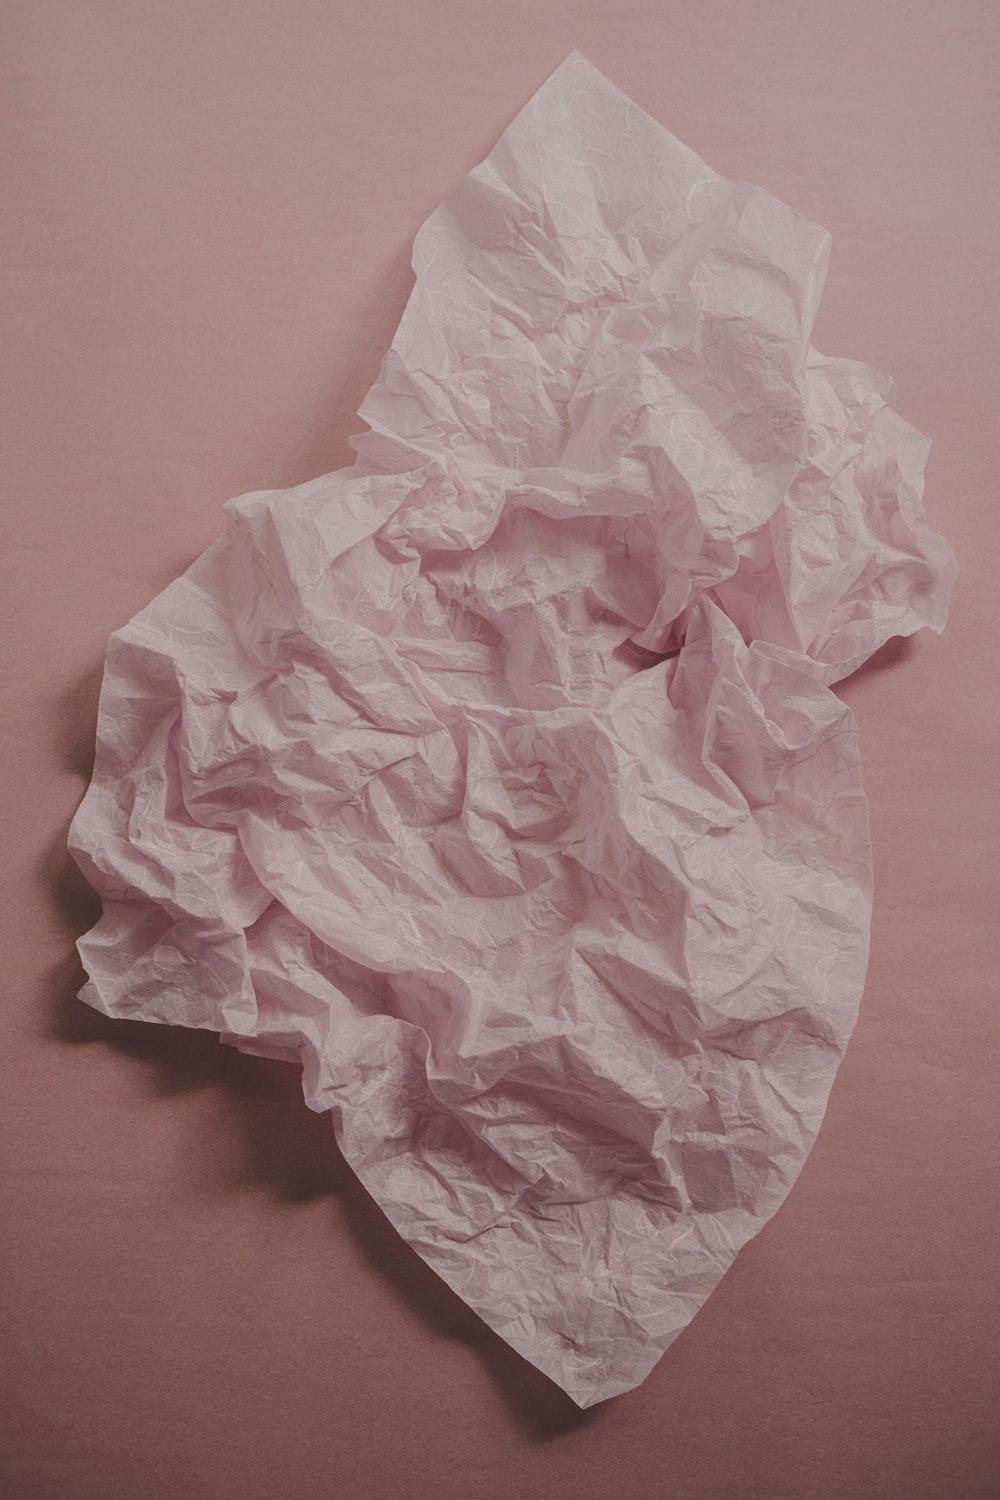 a crumpled piece of paper on a pink surface